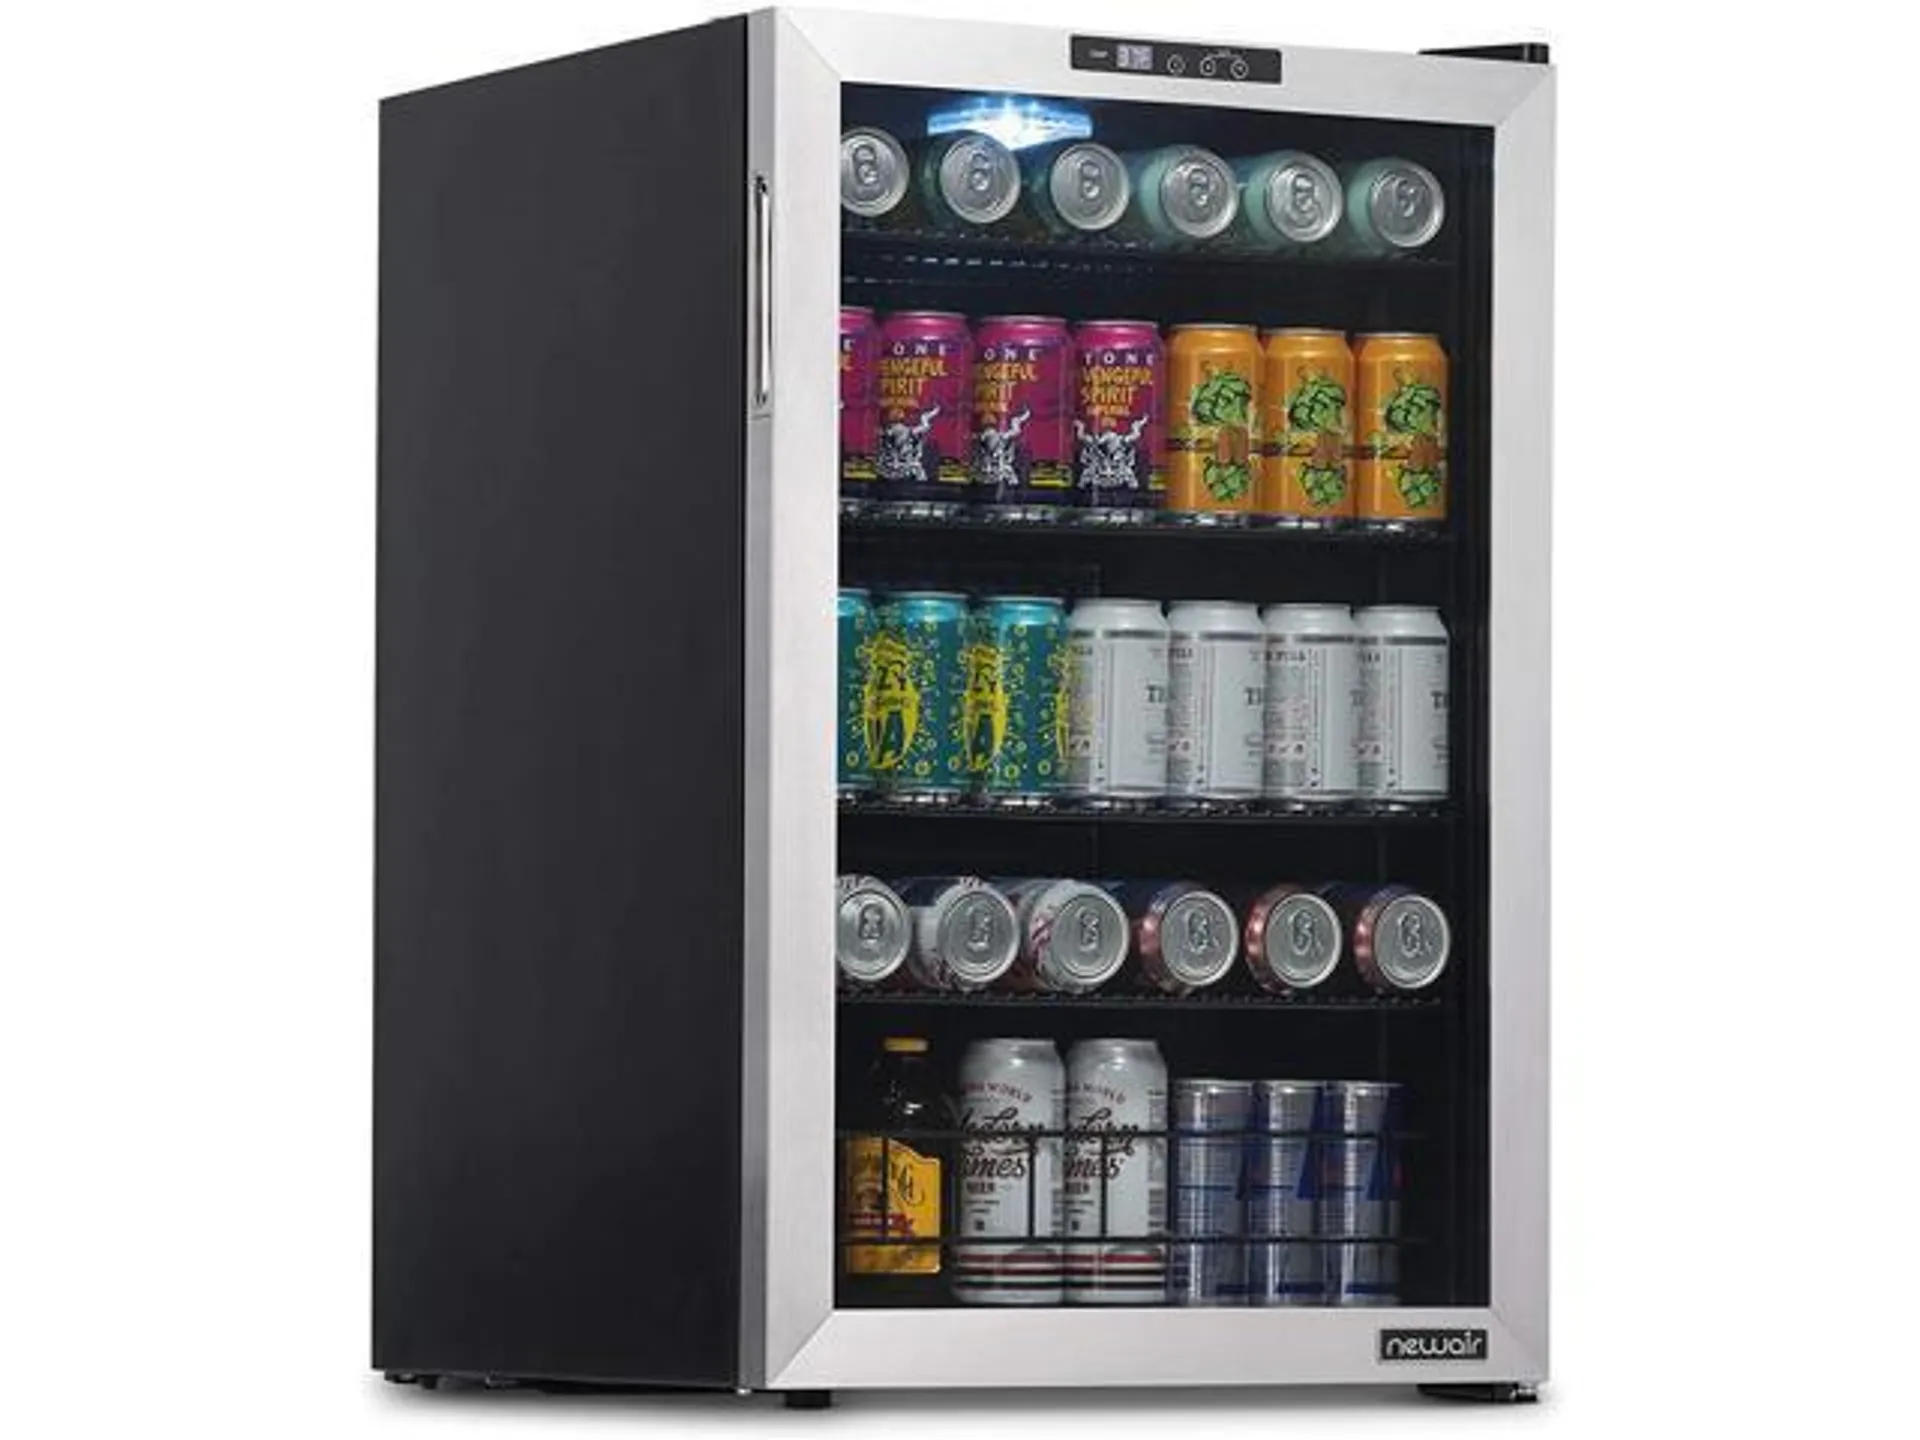 NewAir Beverage Refrigerator And Cooler, Free Standing Glass Door Refrigerator Holds Up To 160 Cans, Cools Down To 37 Degrees Perfect Beverage Organizer For Beer, Wine, And Cooler Drinks NBC160SS00